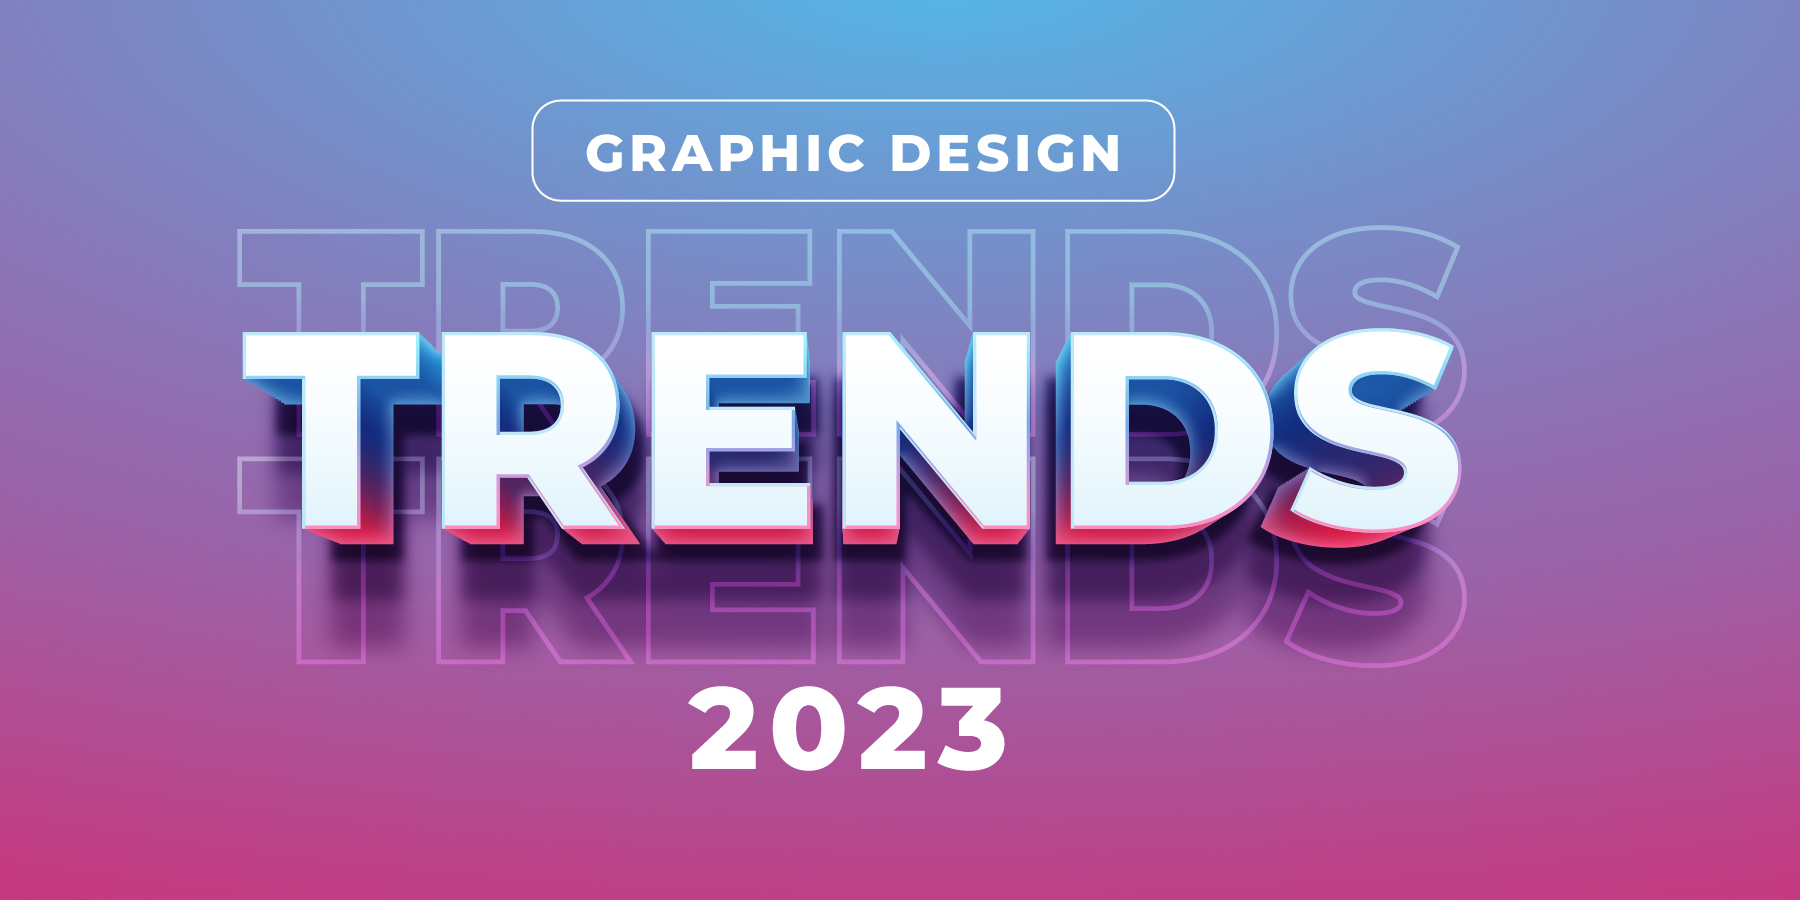 Inspiring Graphic Design Trends for 2023